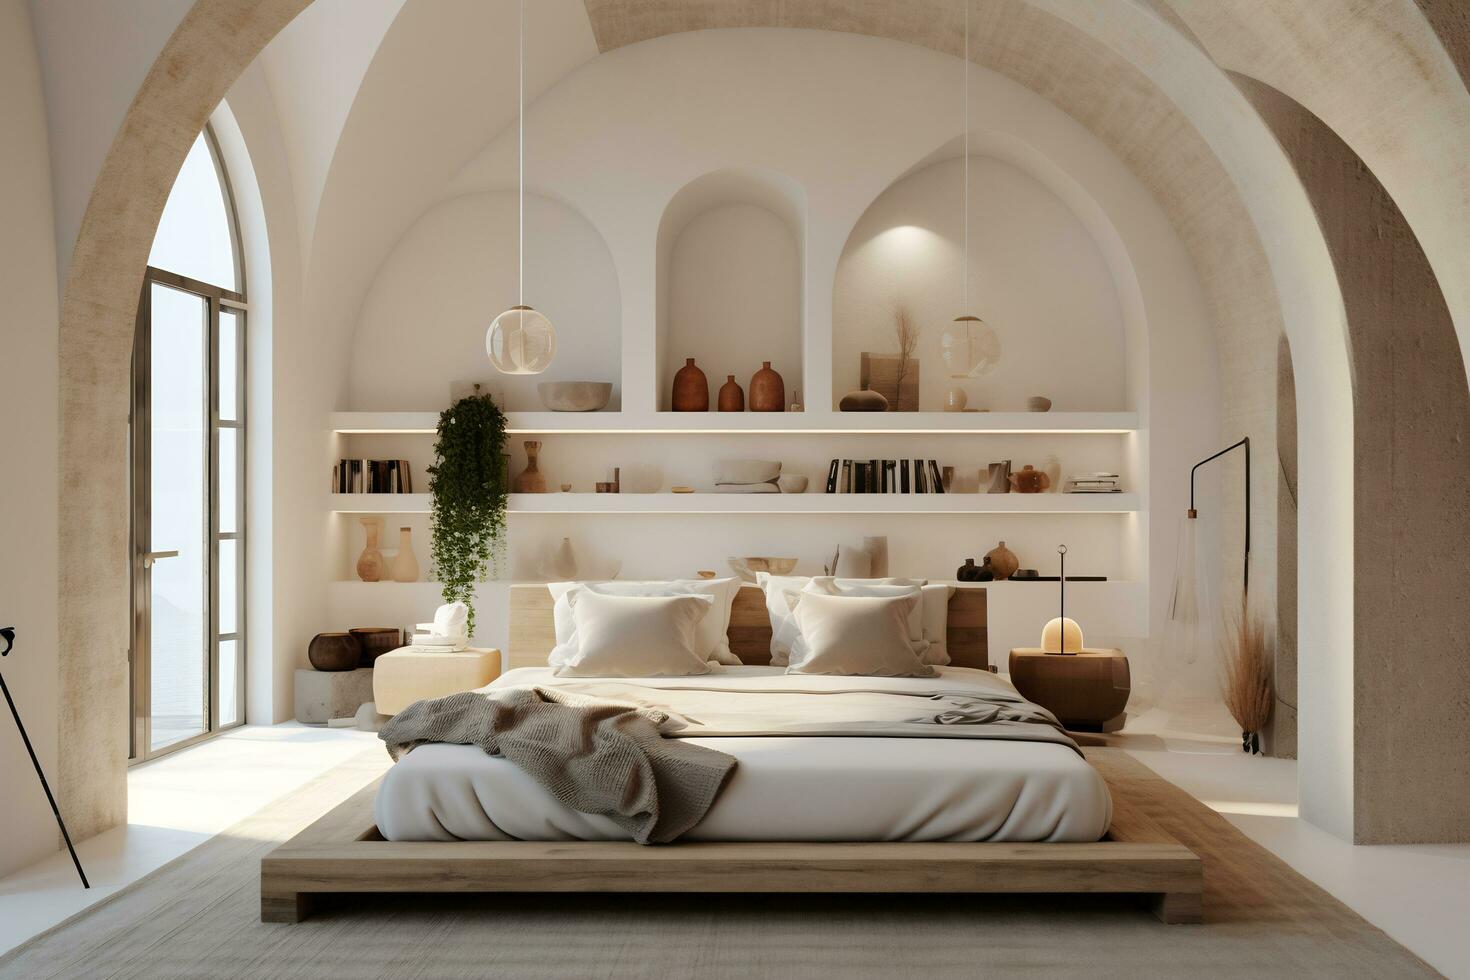 Modern interior bedroom design with arch photo